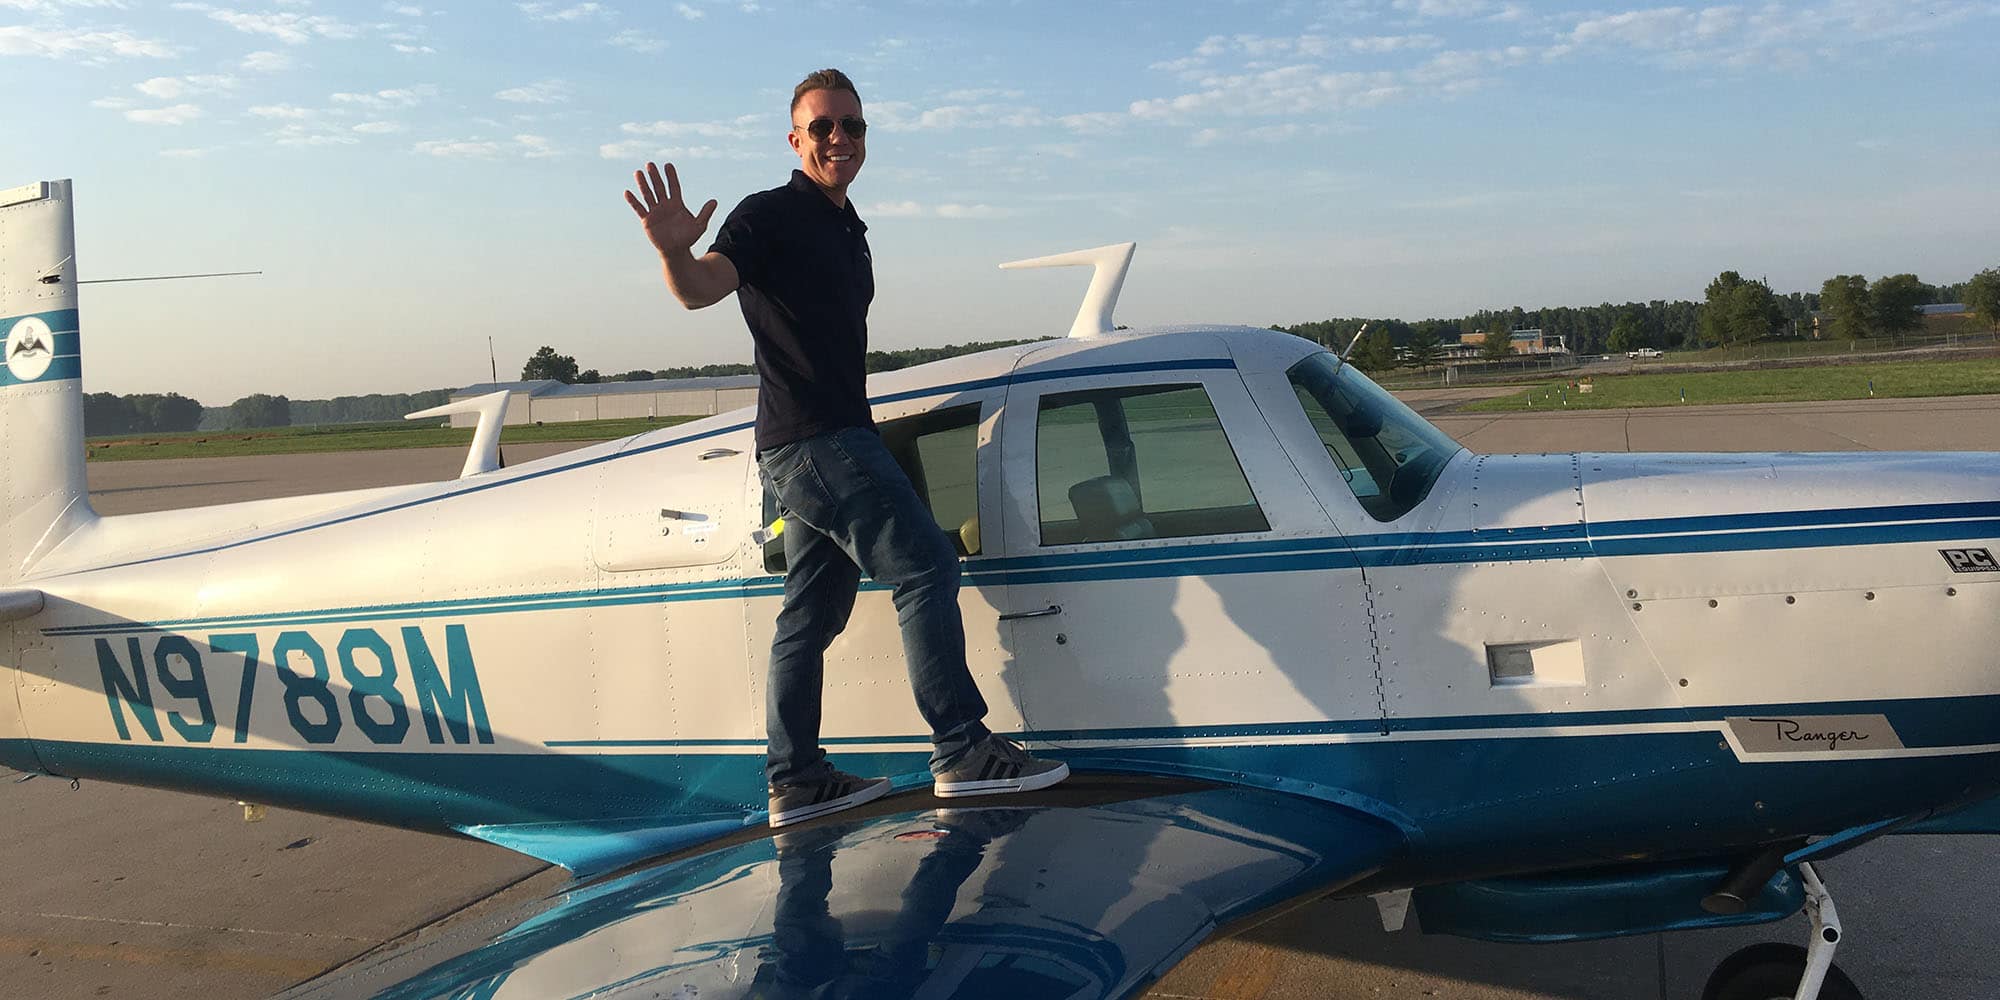 Retiring Space Force veteran and B.S. in Aeronautics graduate Matthew Henkel, on the wing of his Mooney M-20C, is ready to launch a new career as a professional pilot.